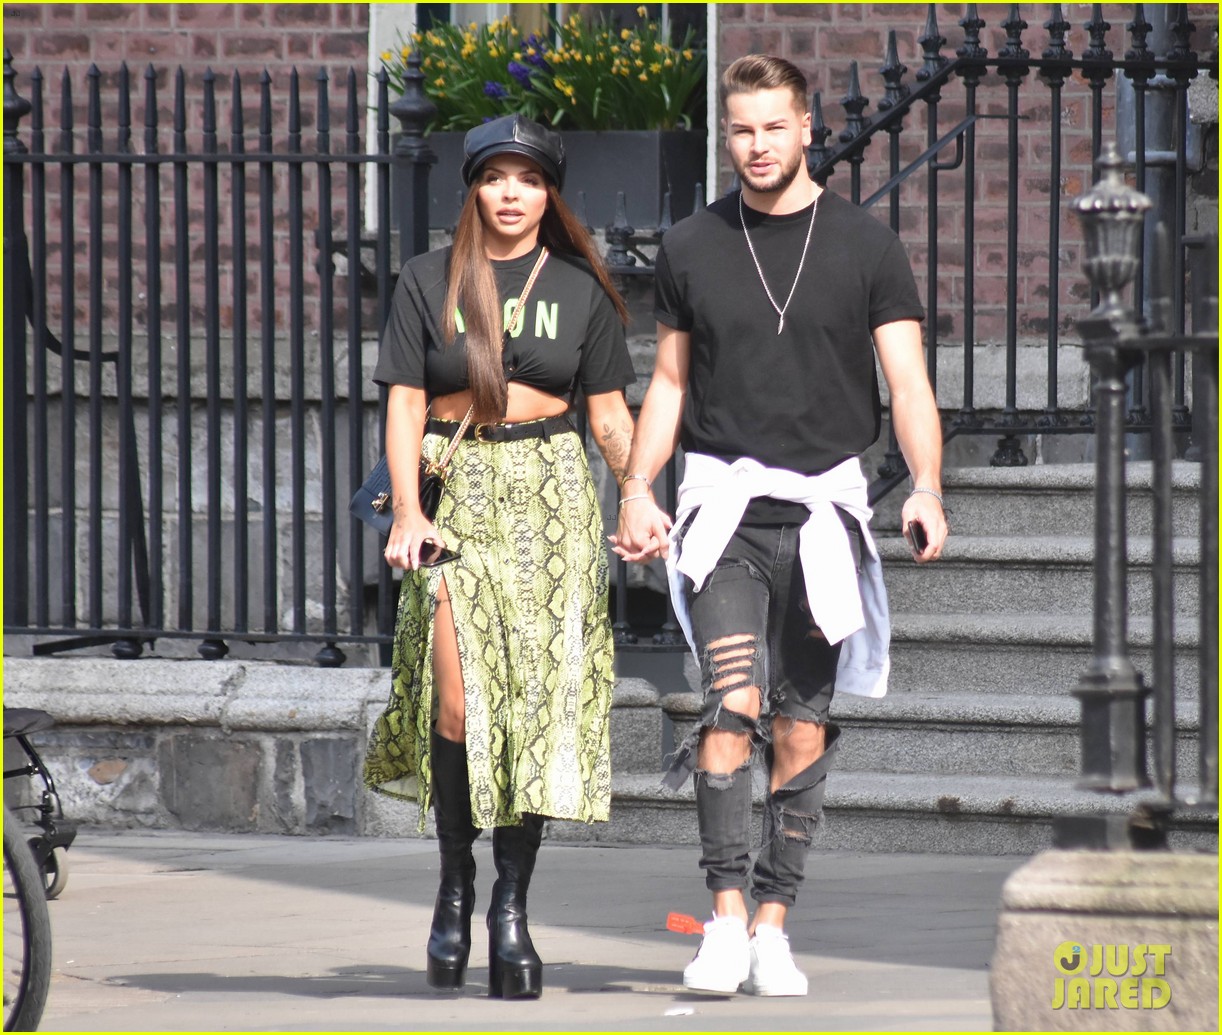 jesy nelson and boyfriend chris hughes hold hands while out in dublin 02